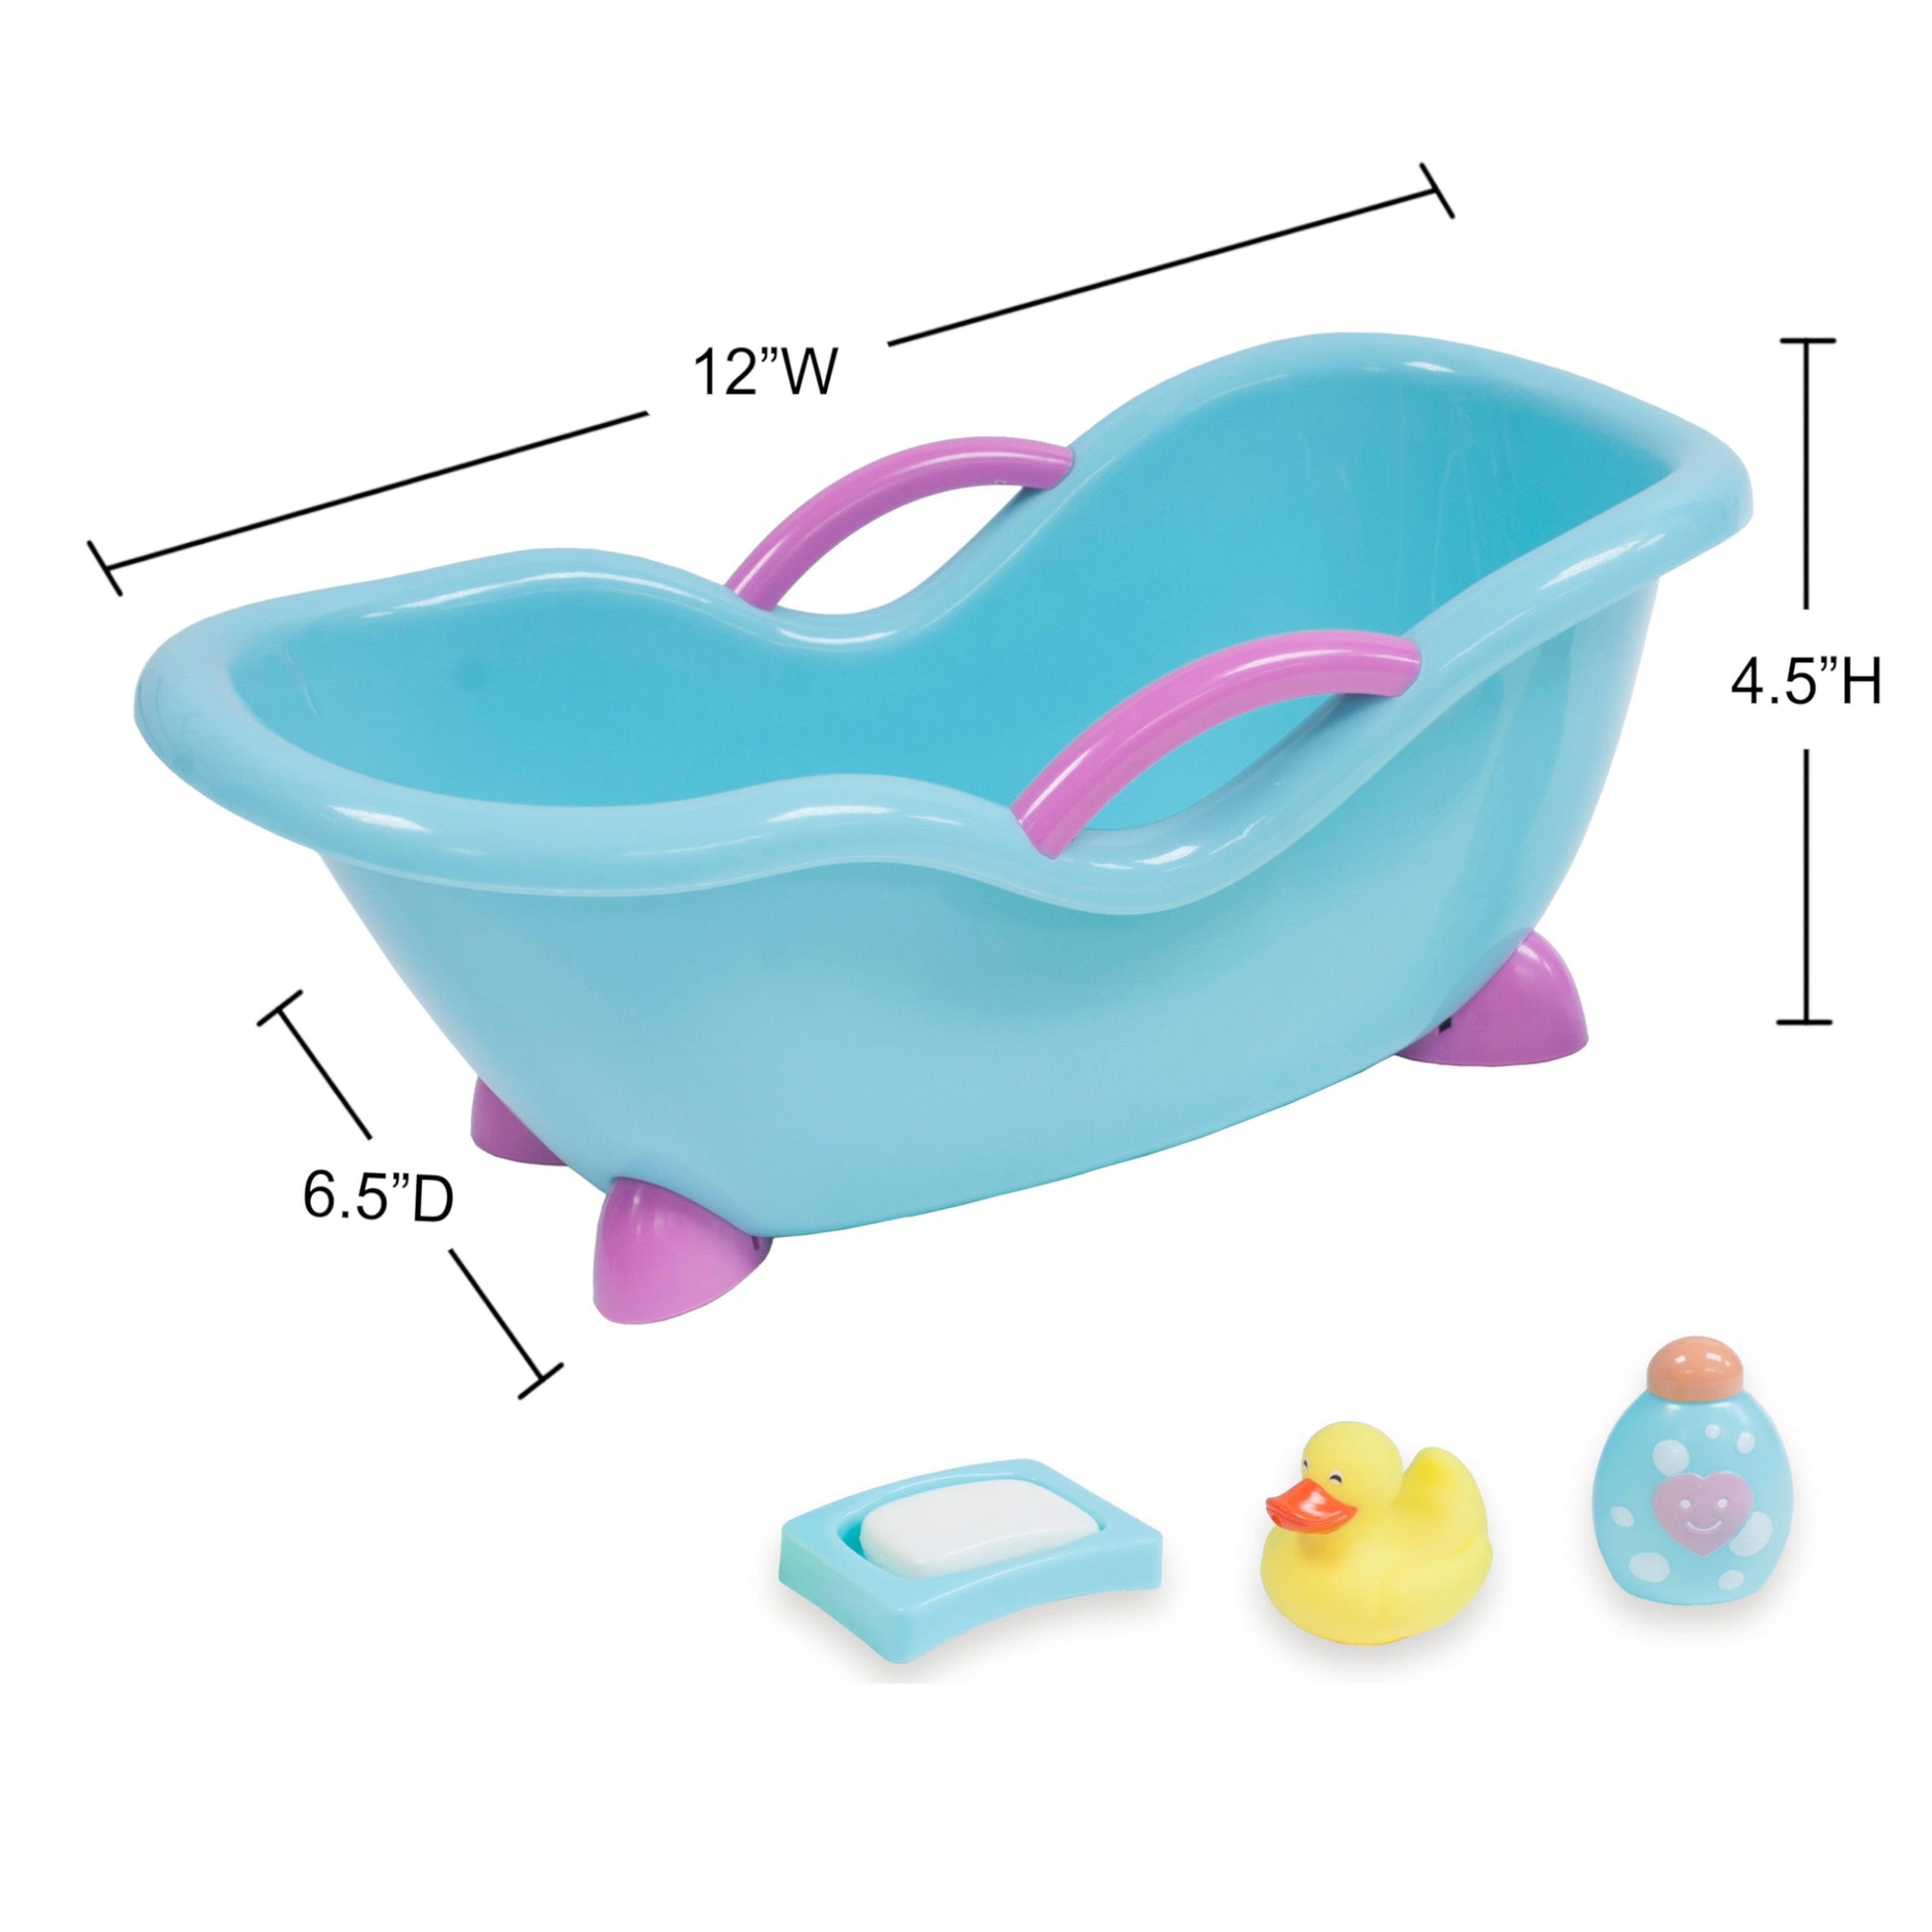 For Keeps! Blue with Pink Baby Doll Bath Gift Set - Fits Small Dolls up to 11” dolls - JC Toys Group Inc.